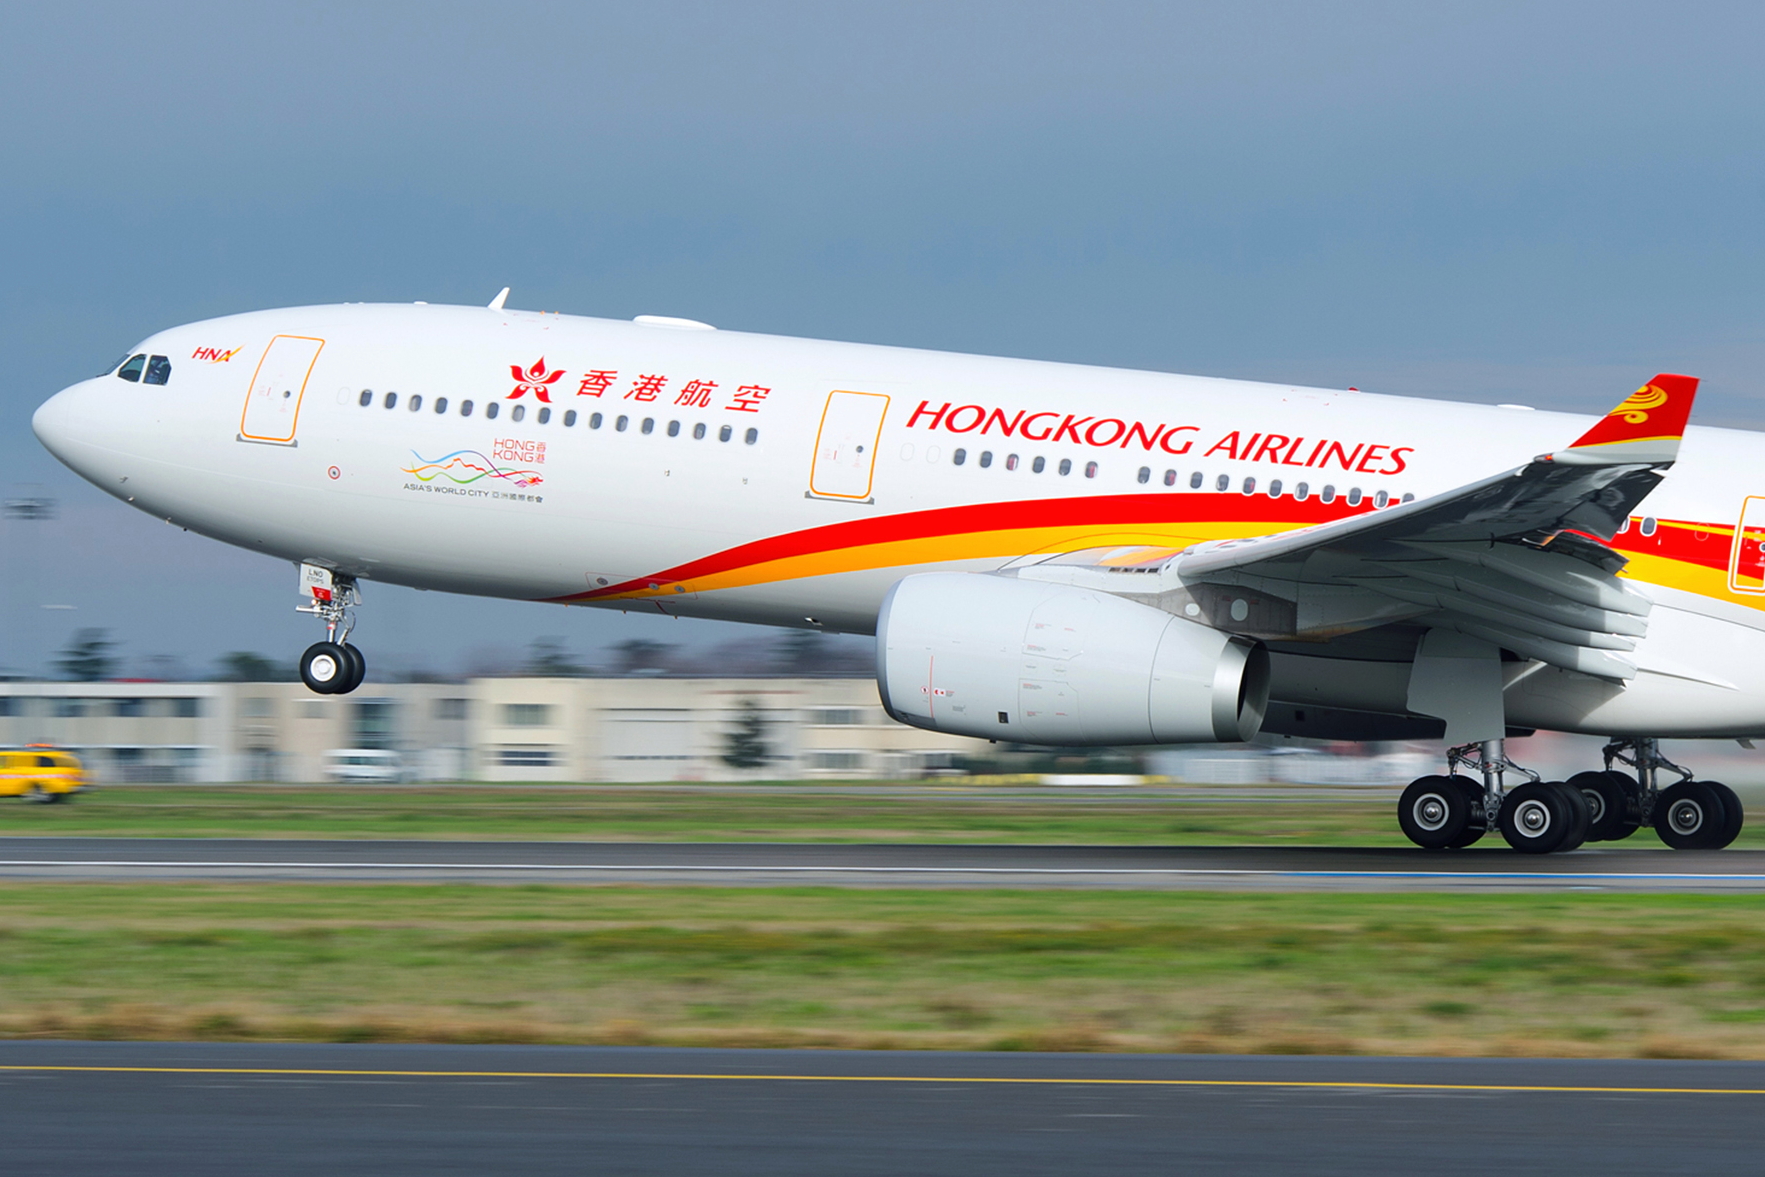 Hong Kong Airlines Airbus A330. Click to enlarge.